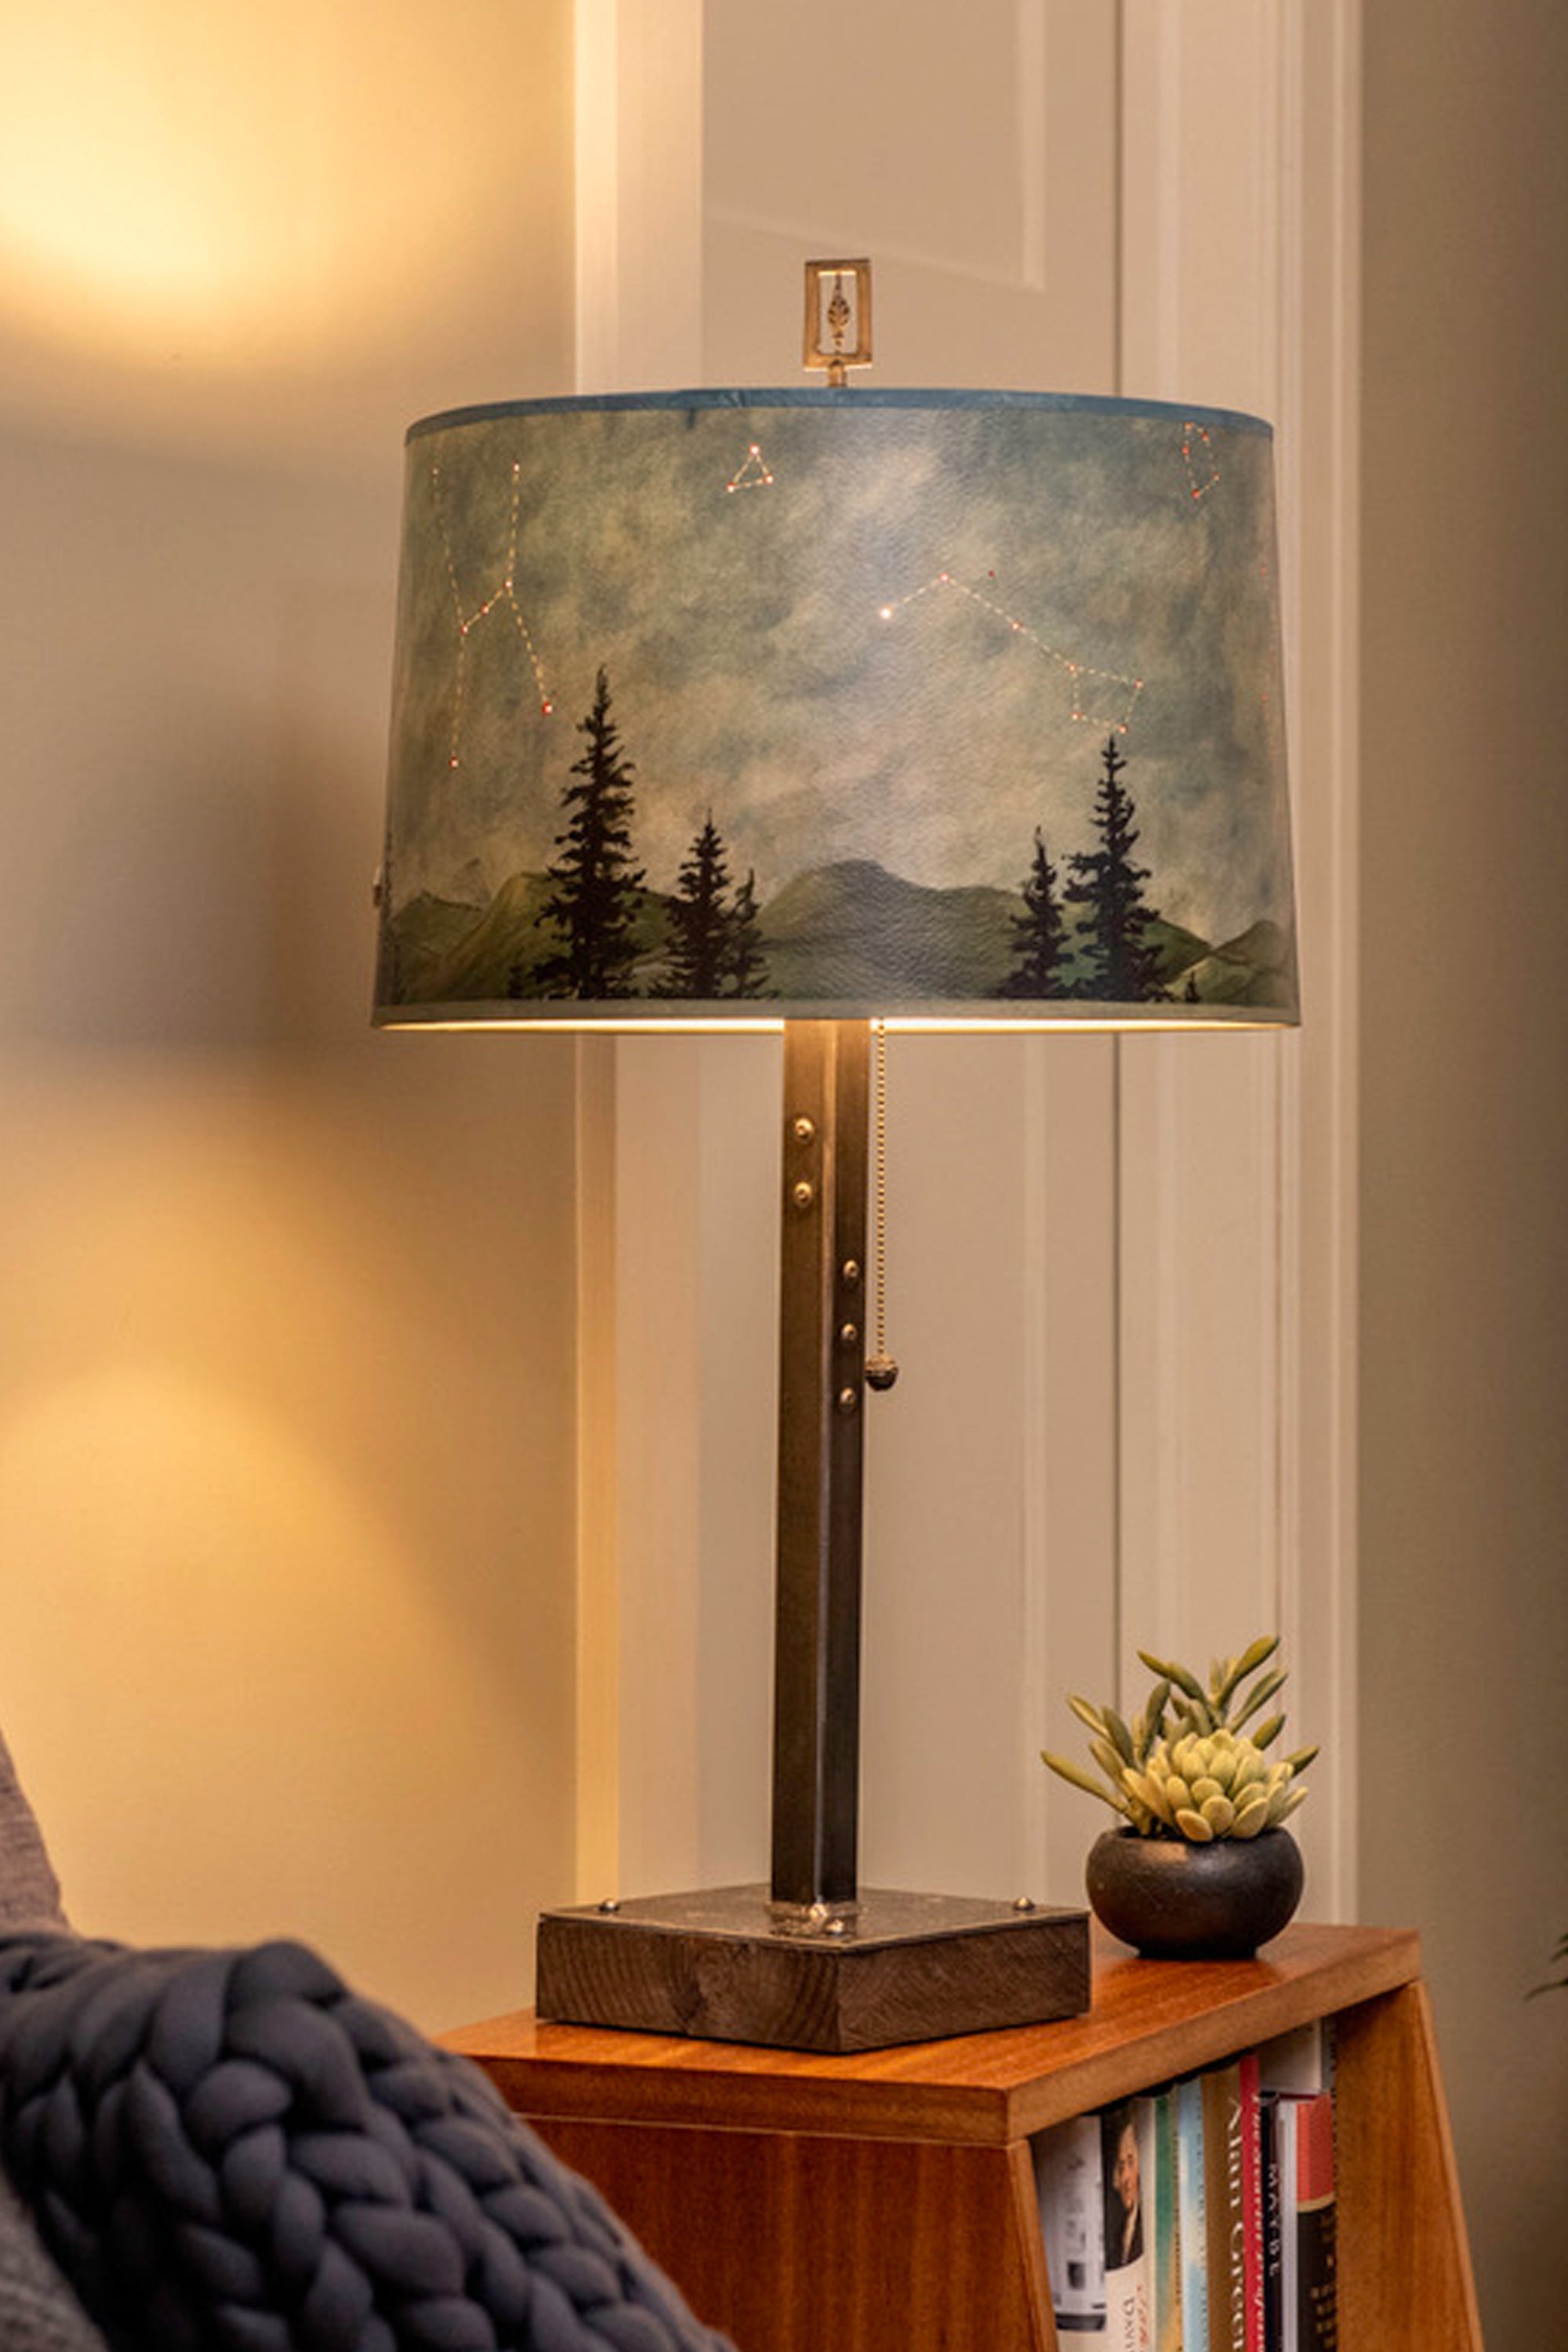 Janna Ugone & Co Table Lamps Steel Table Lamp on Wood with Large Drum Shade in Midnight Sky